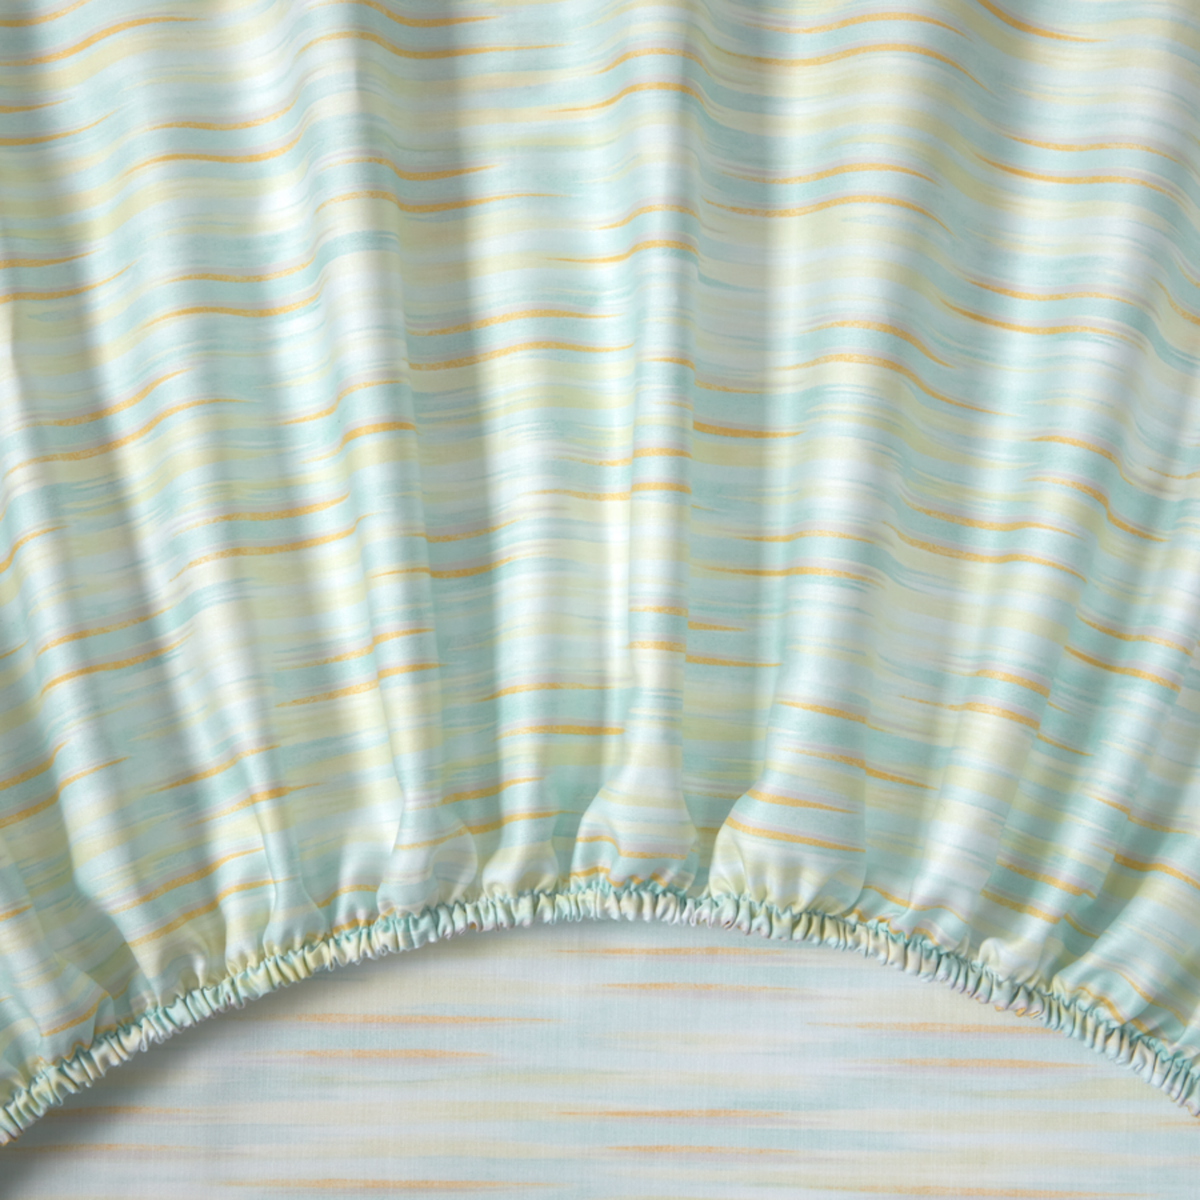 Fitted Sheet Detail of Yves Delorme Grimani Bedding